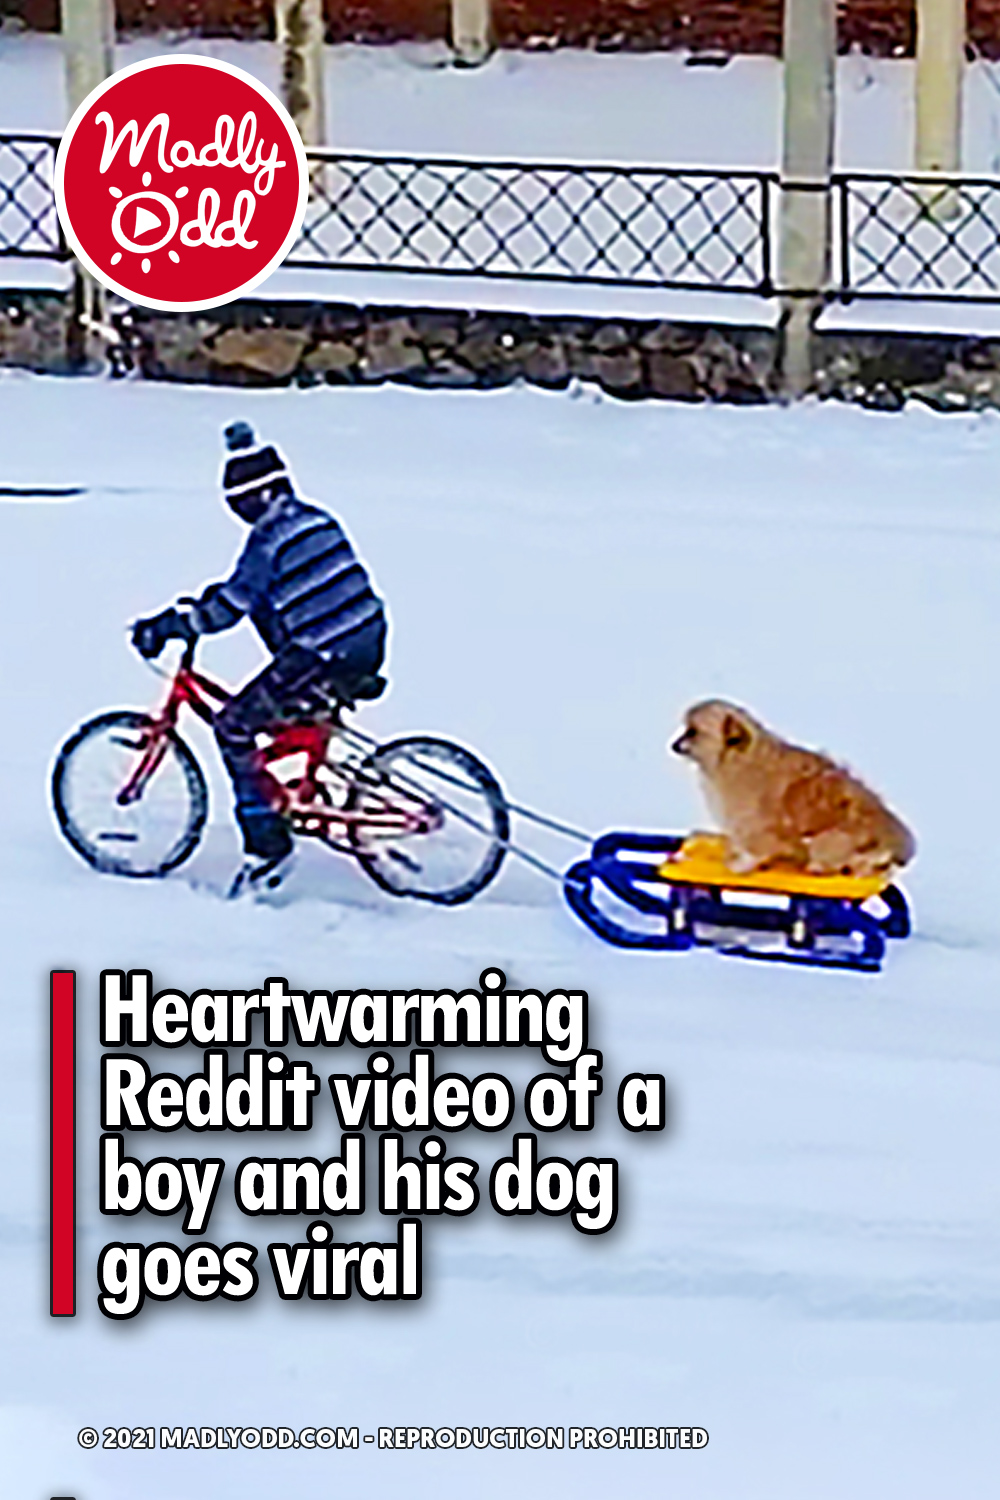 Heartwarming Reddit video of a boy and his dog goes viral